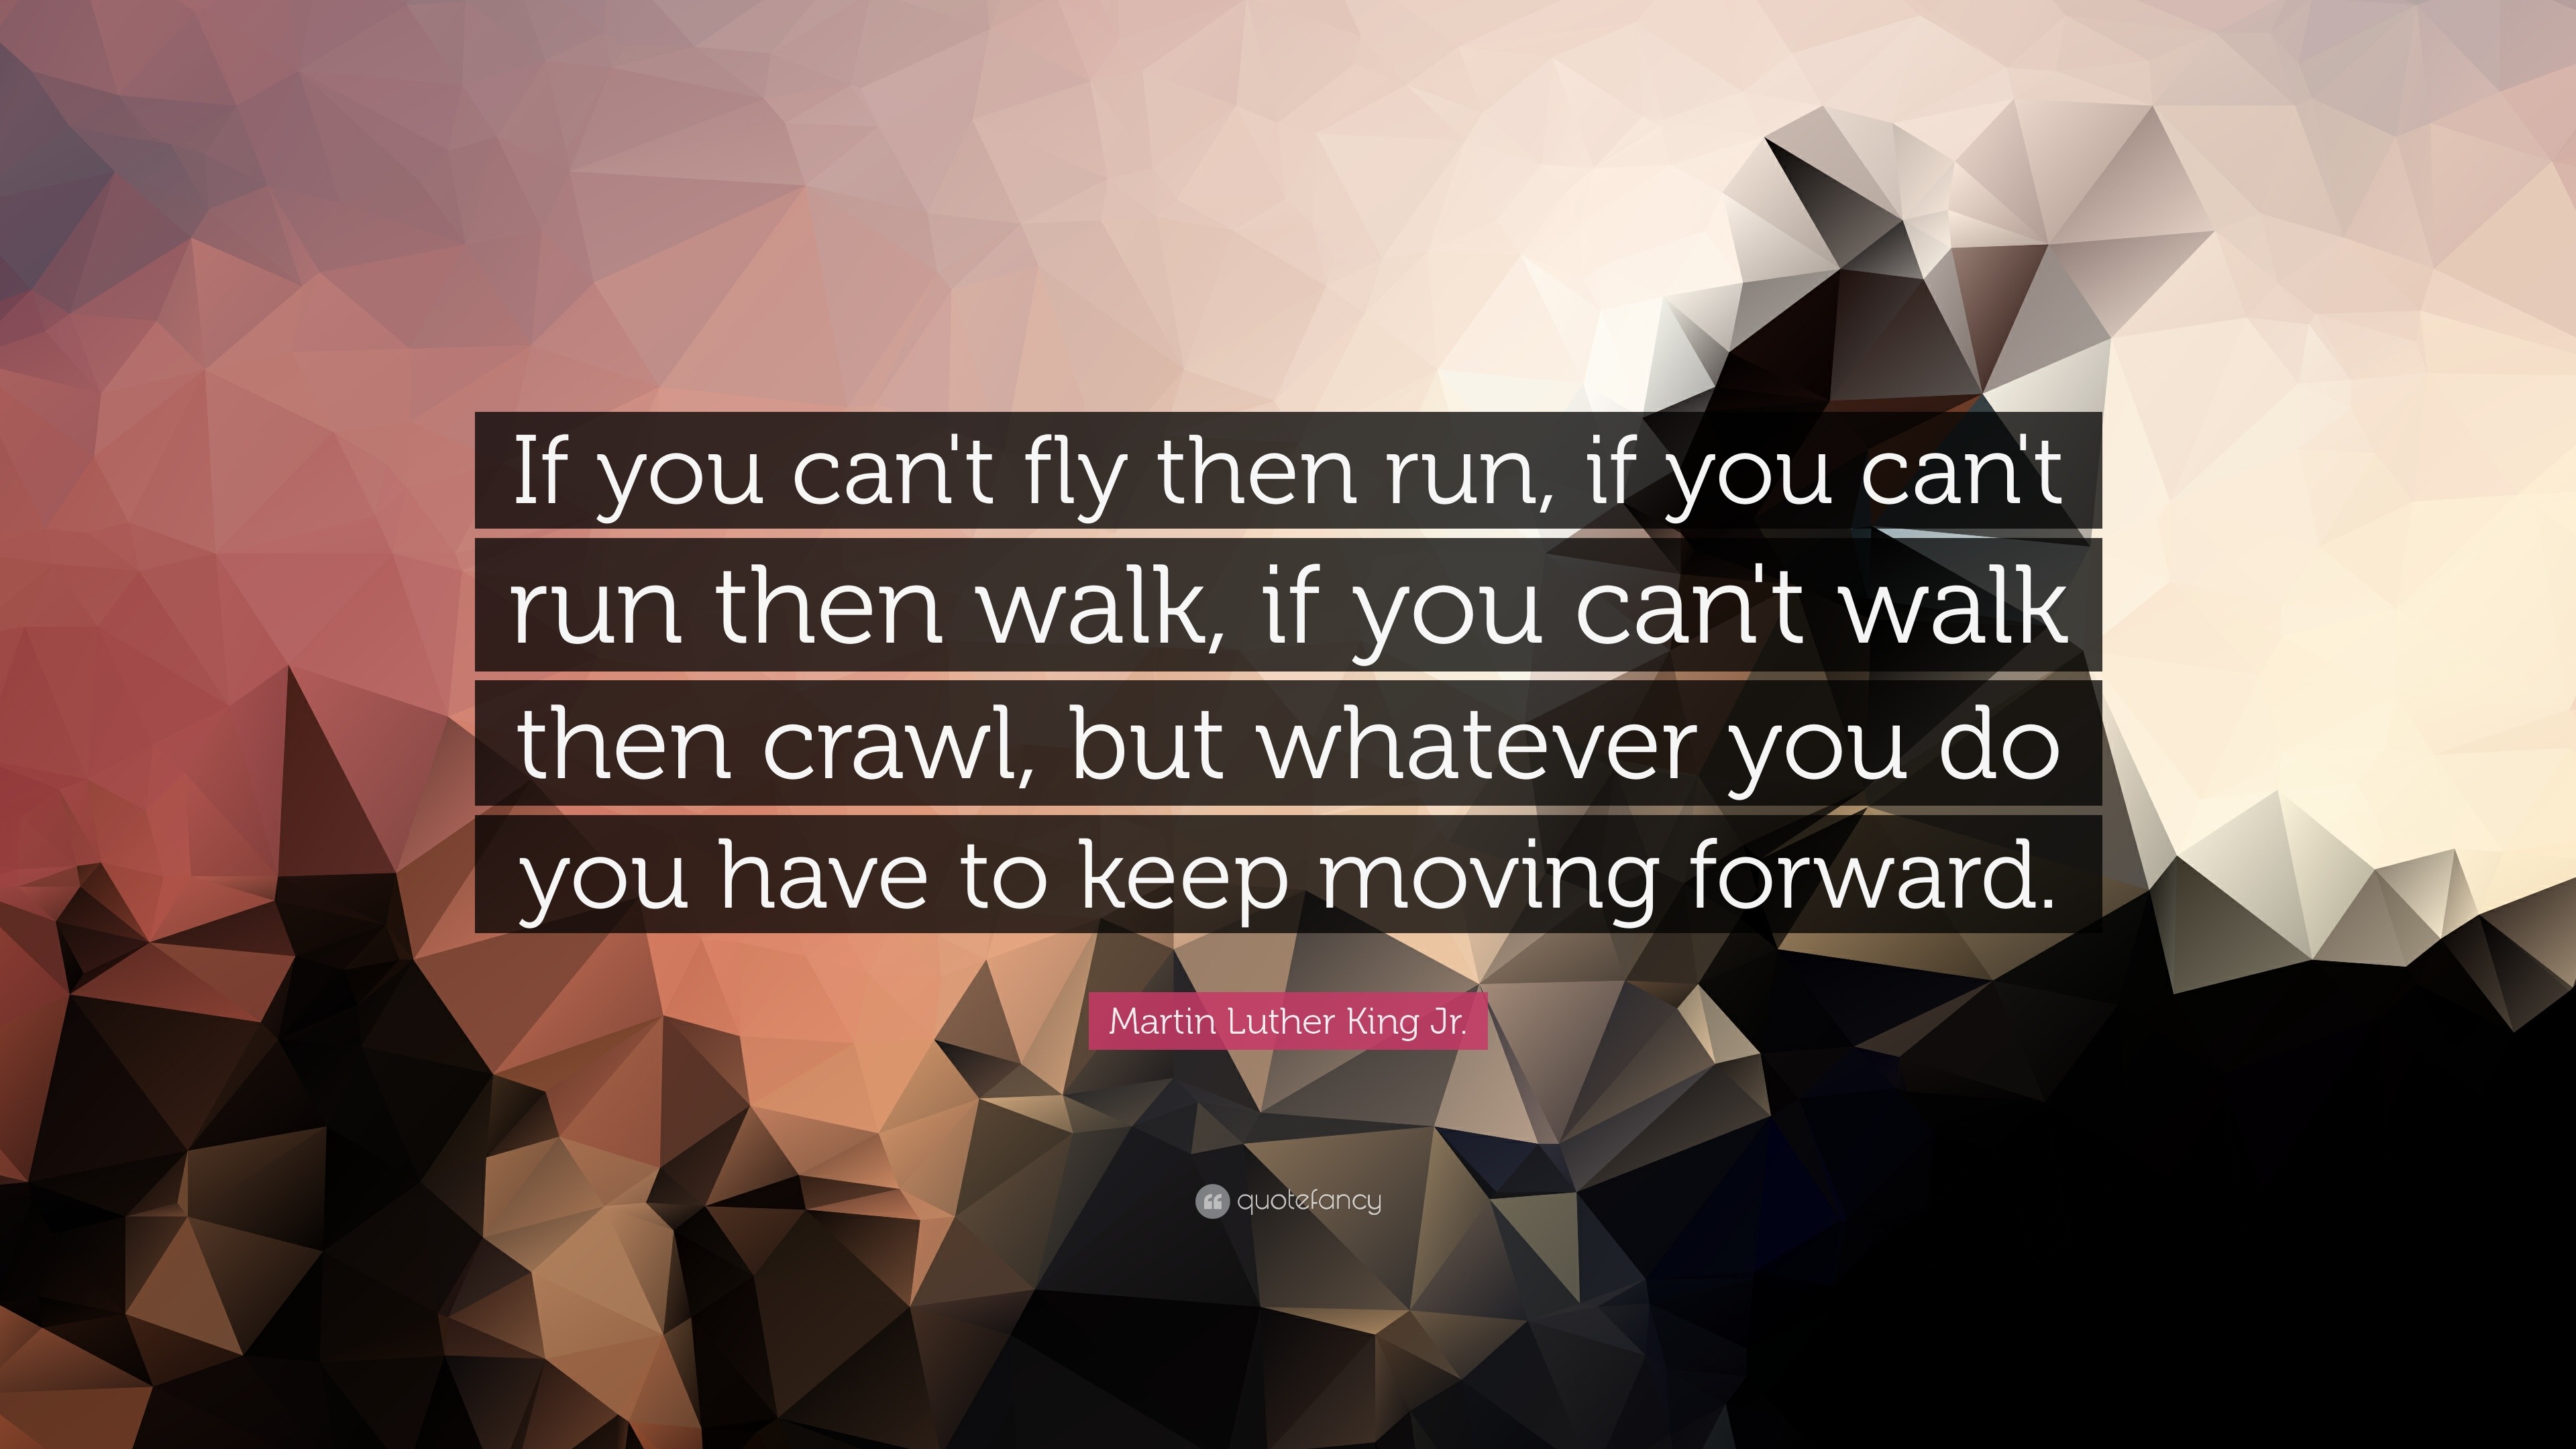 10238 Martin Luther King Jr Quote If you can t fly then run if you can t